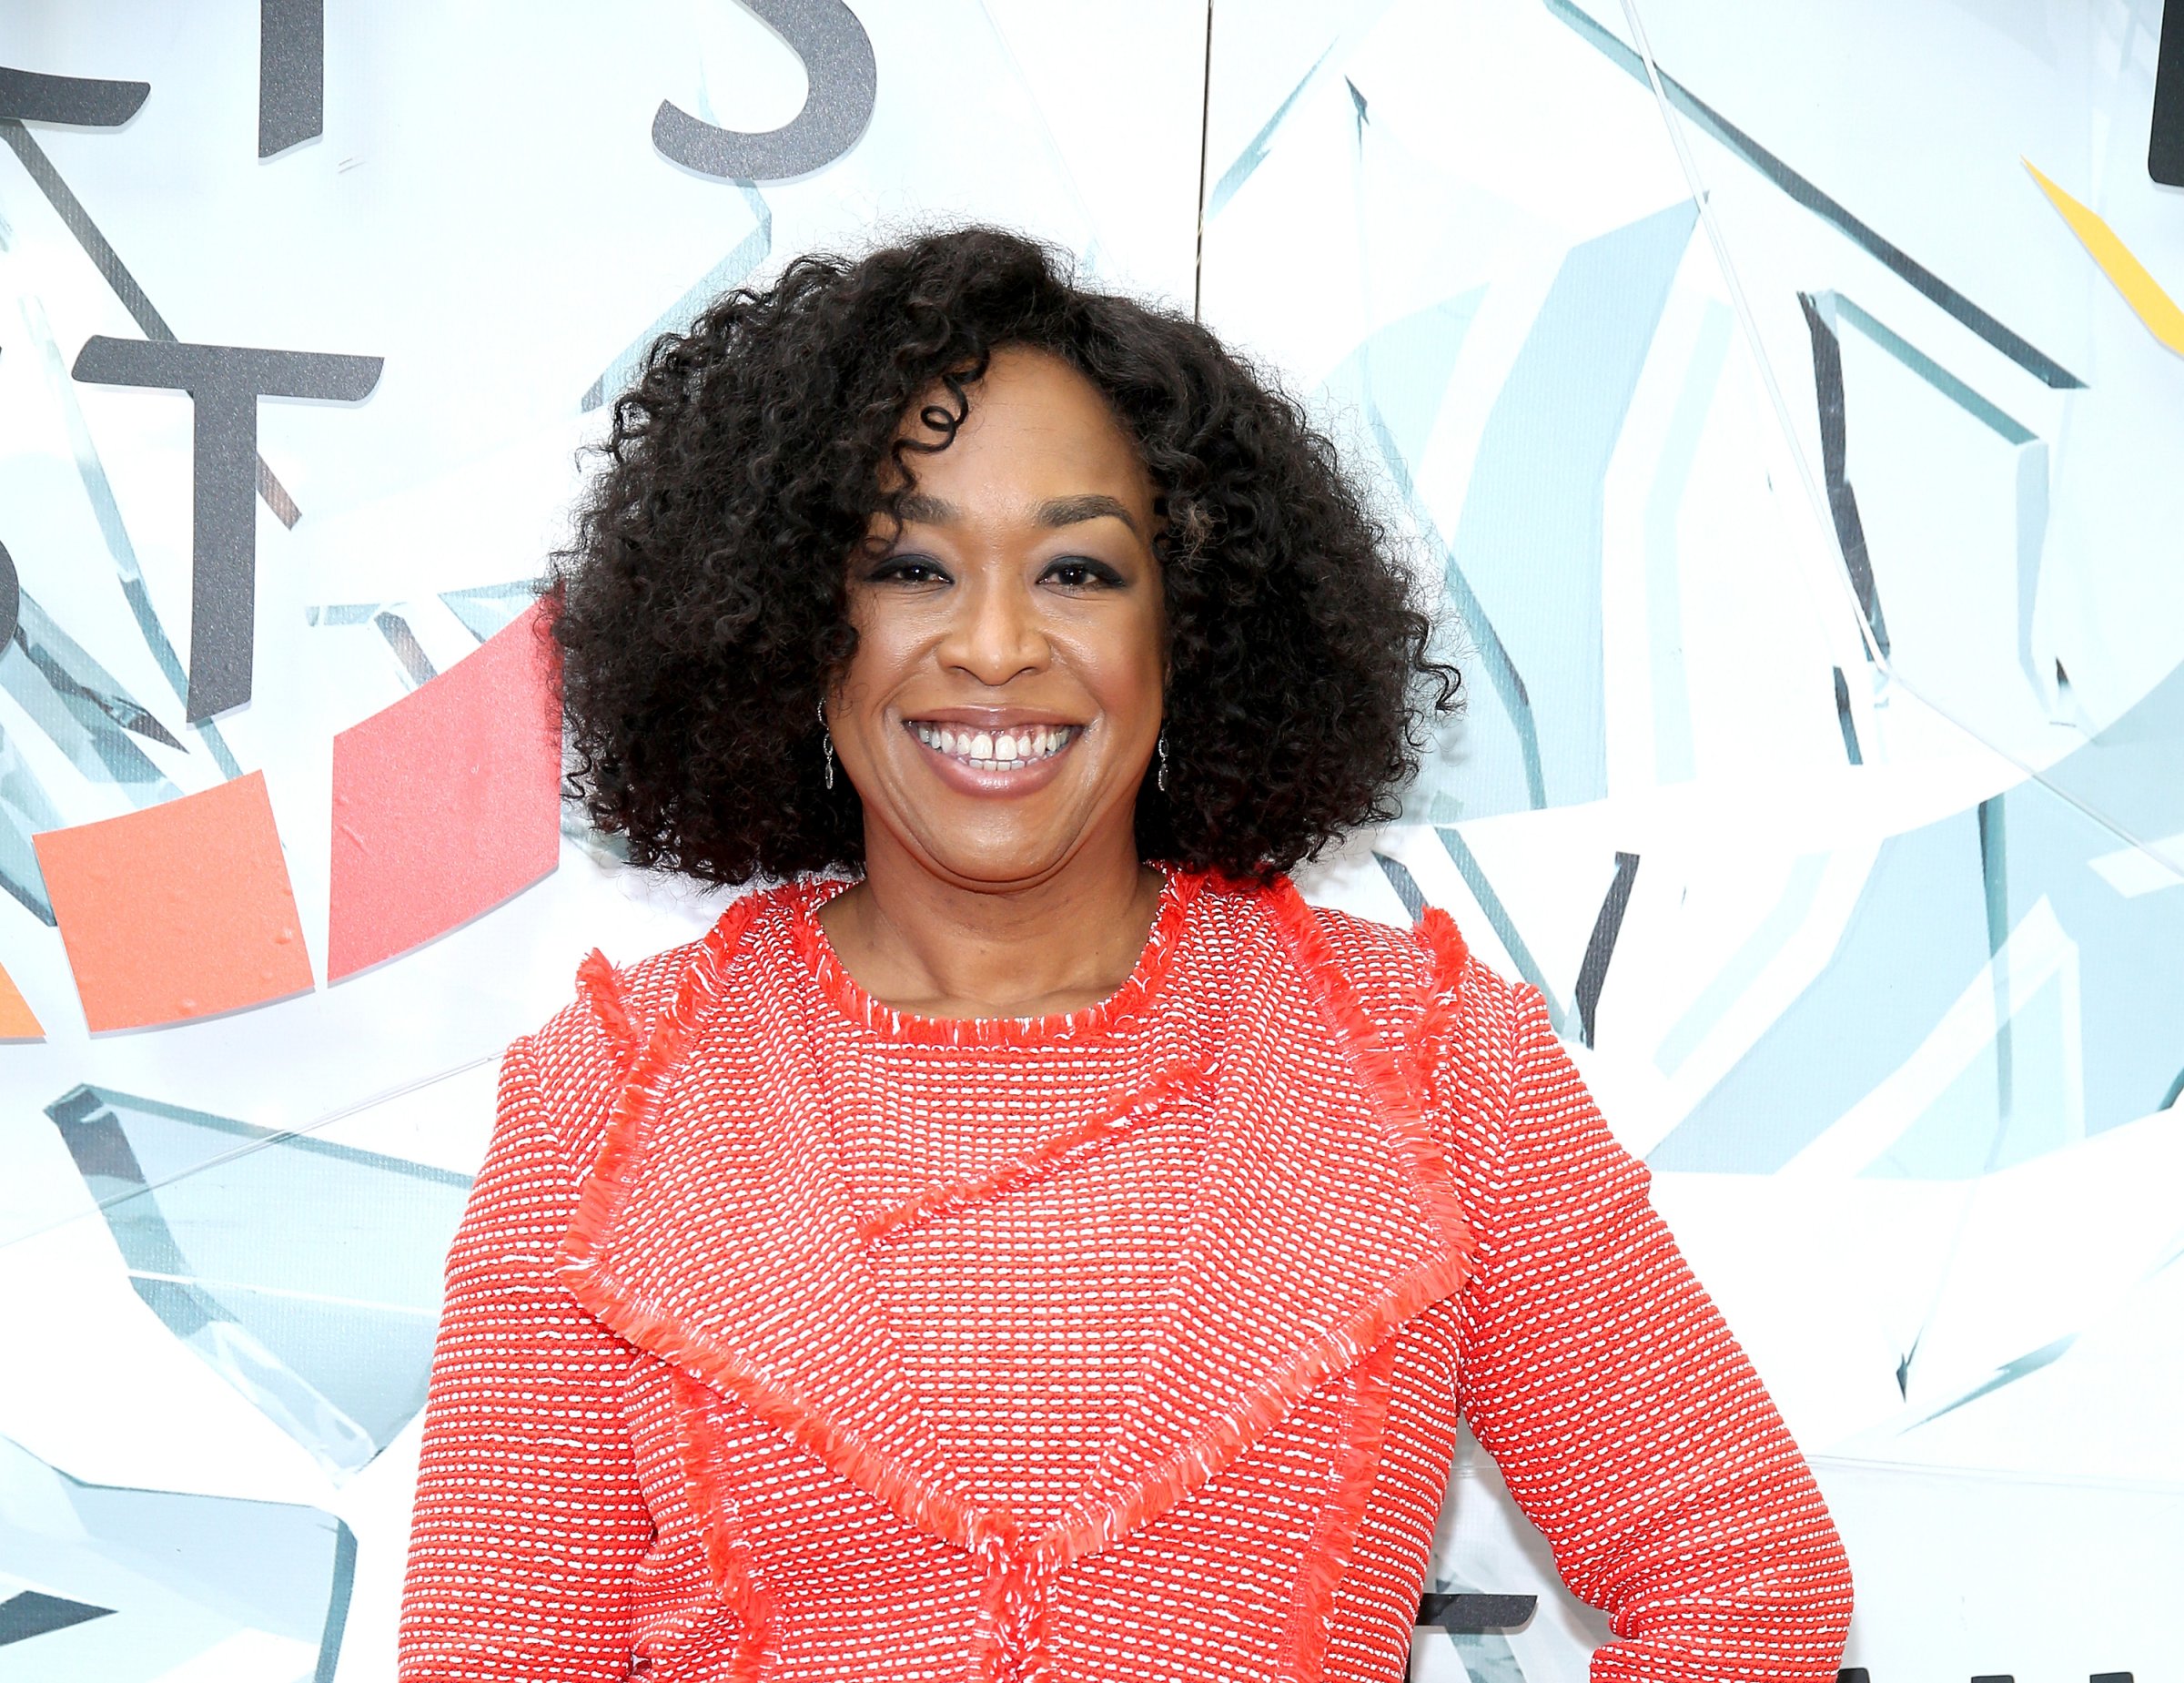 Producer and writter Shonda Rhimes attends EMILY's List Breaking Through 2016 at the Democratic National Convention at Kimmel Center for the Performing Arts on July 27, 2016 in Philadelphia, Pennsylvania.